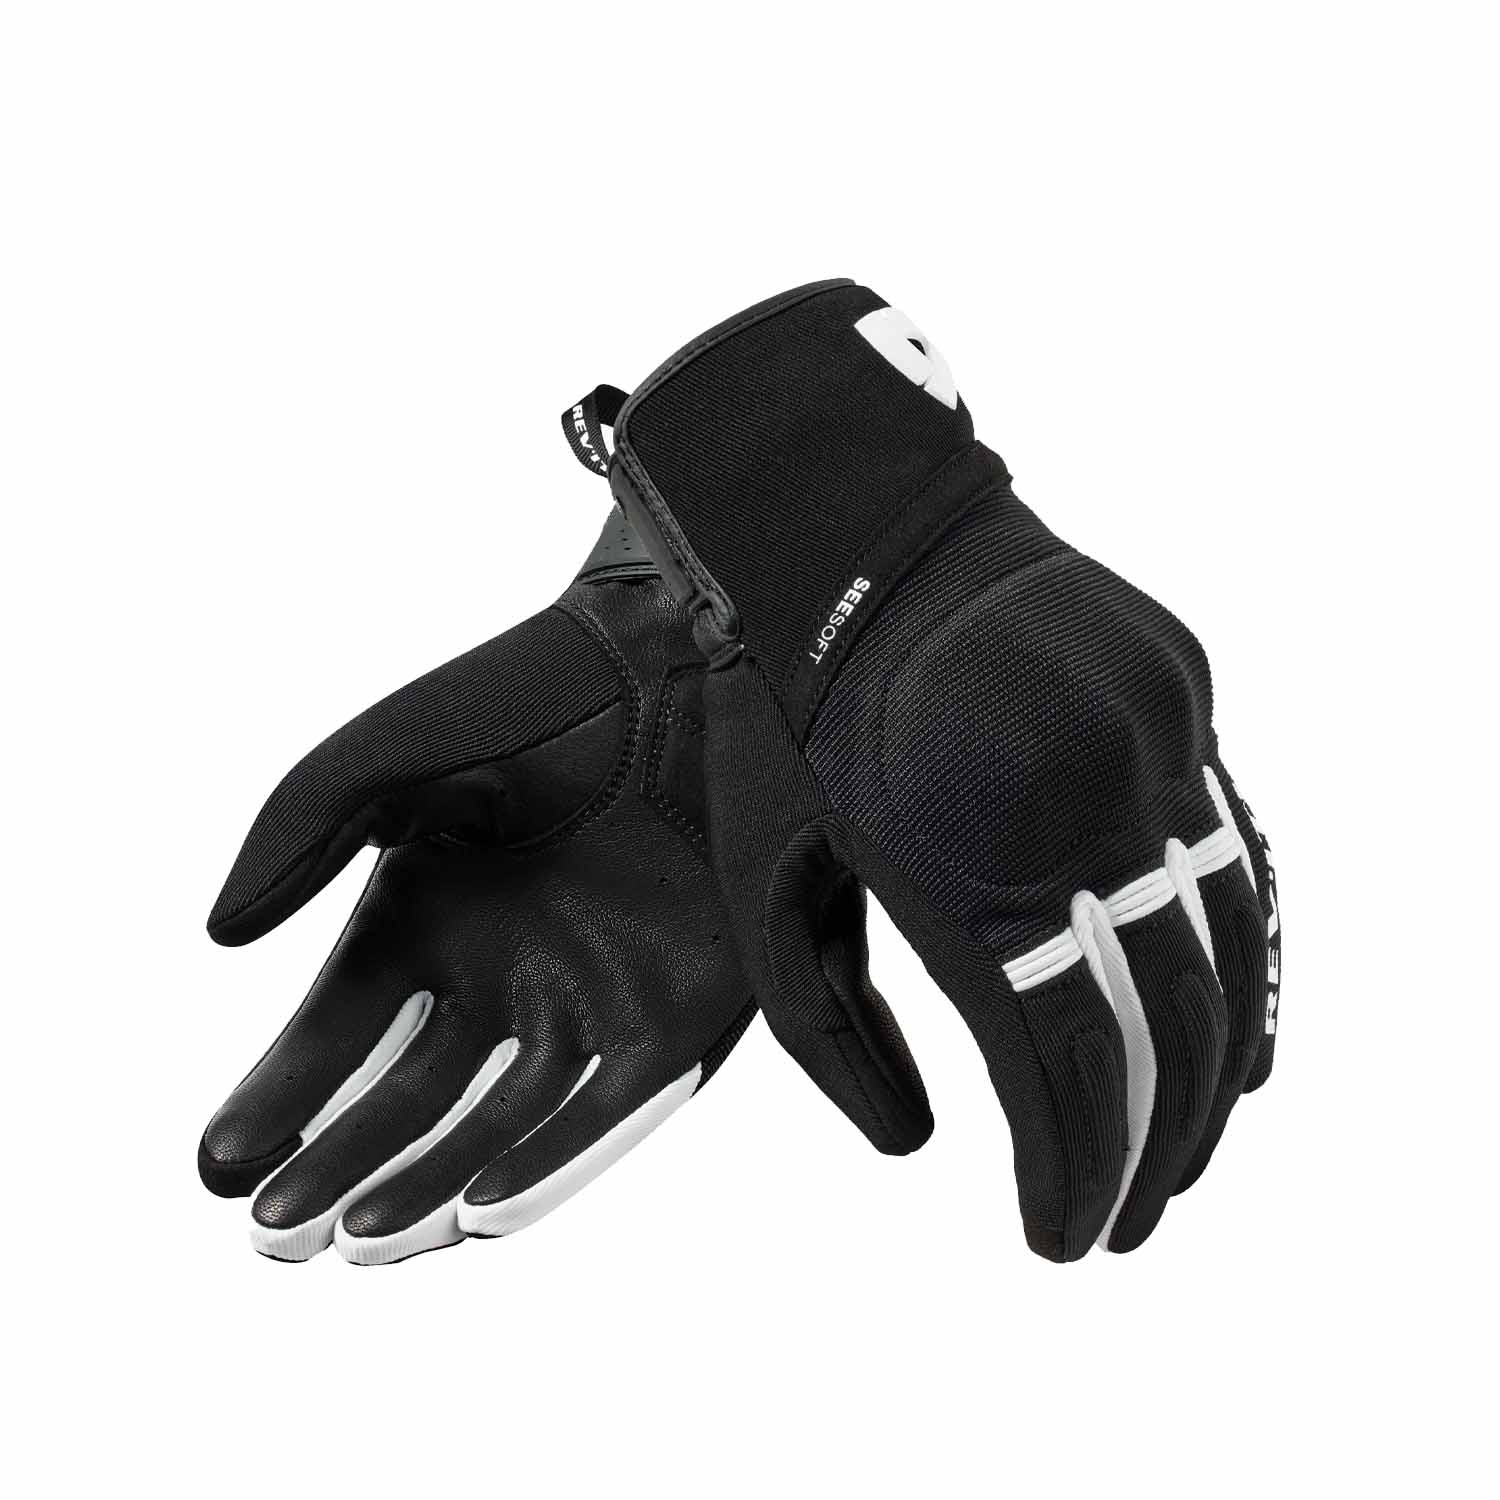 Image of EU REV'IT! Mosca 2 Gloves Black White Taille S